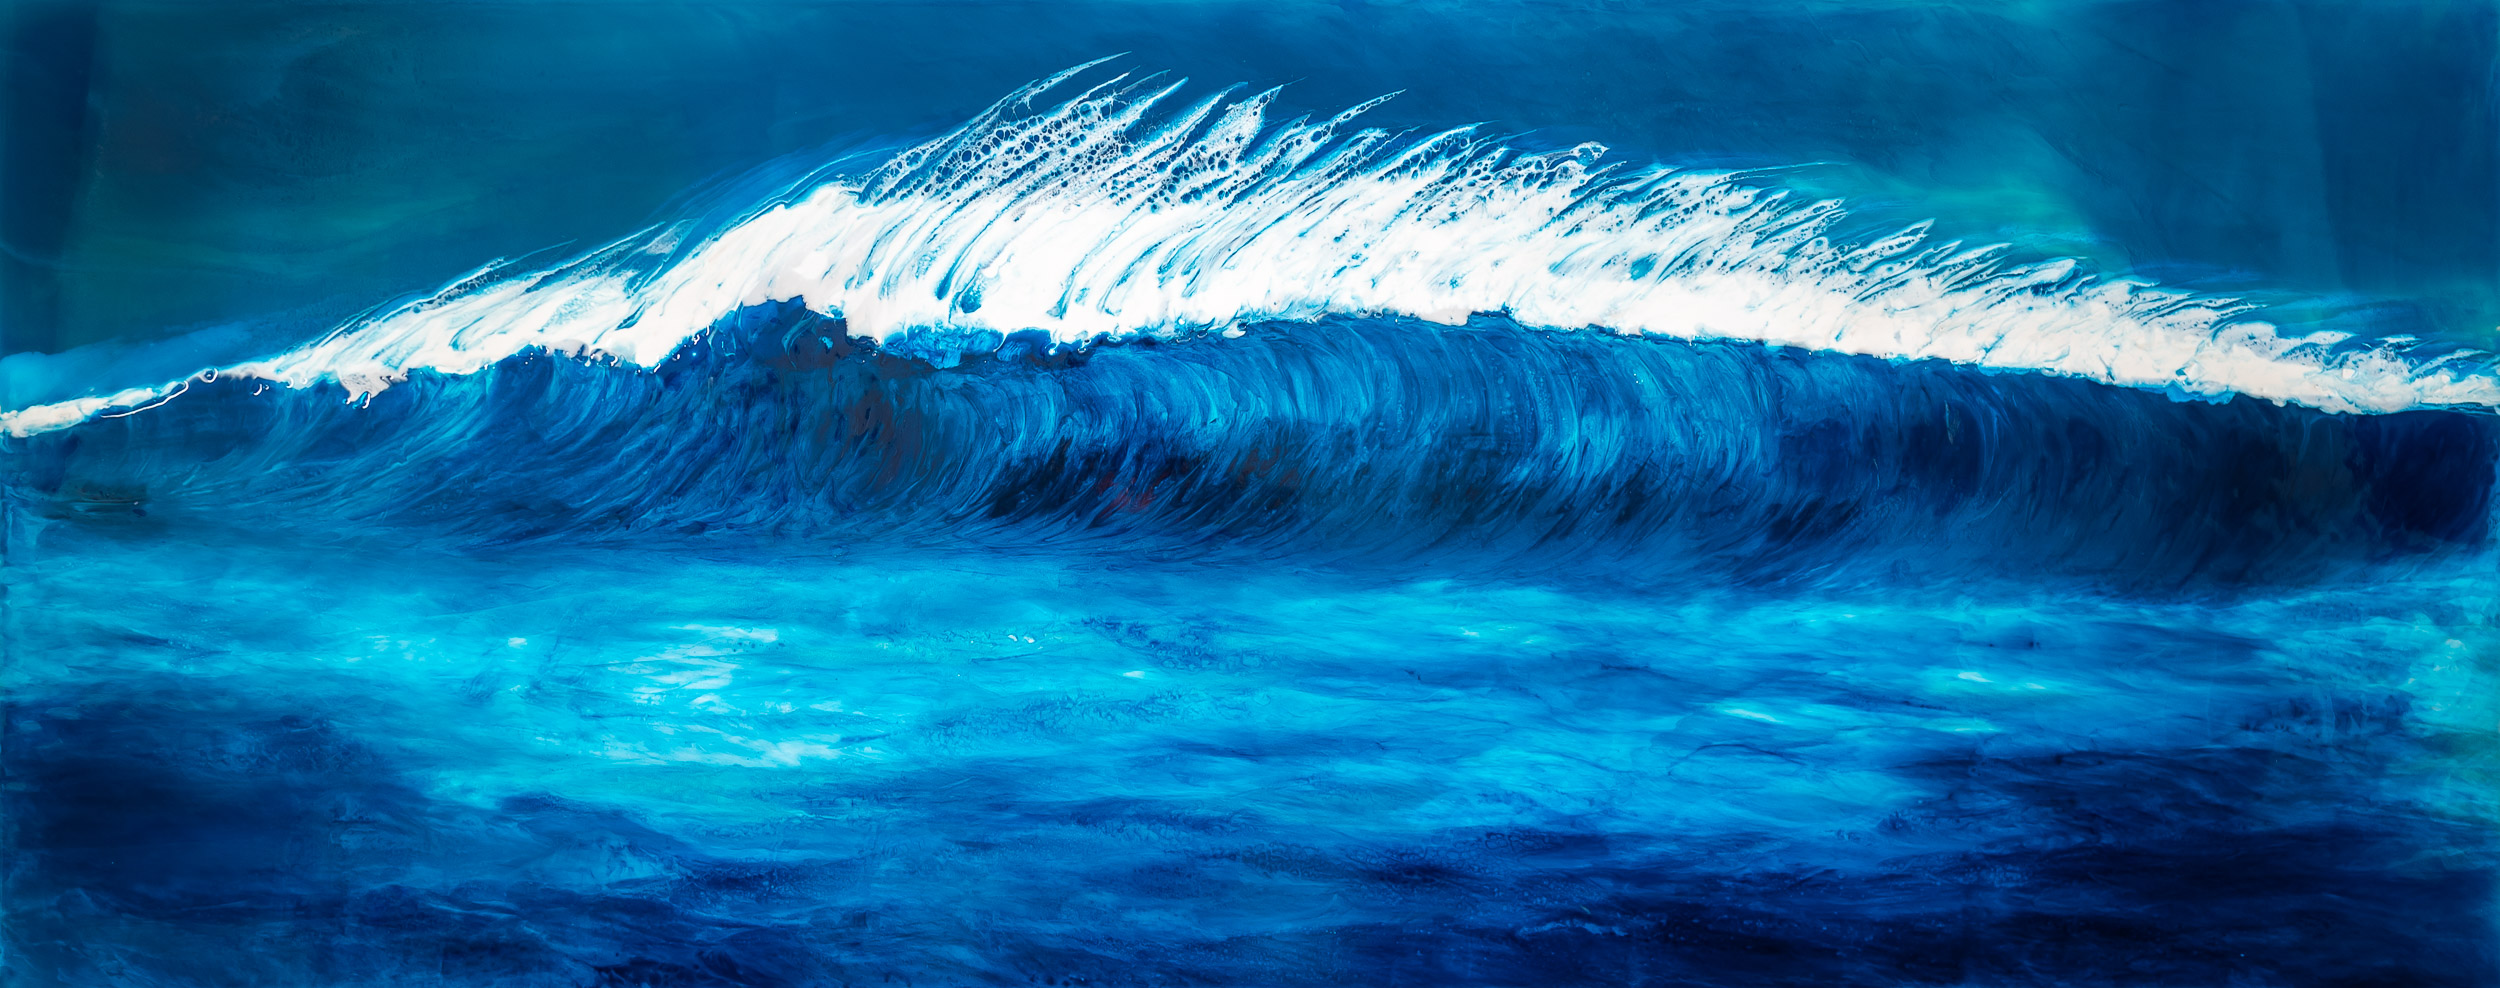 Perfection by Paul Kenton, UK Contemporary artist, an Original Seascape Wave Painting from his Seascapes and Mountainscapes art collection